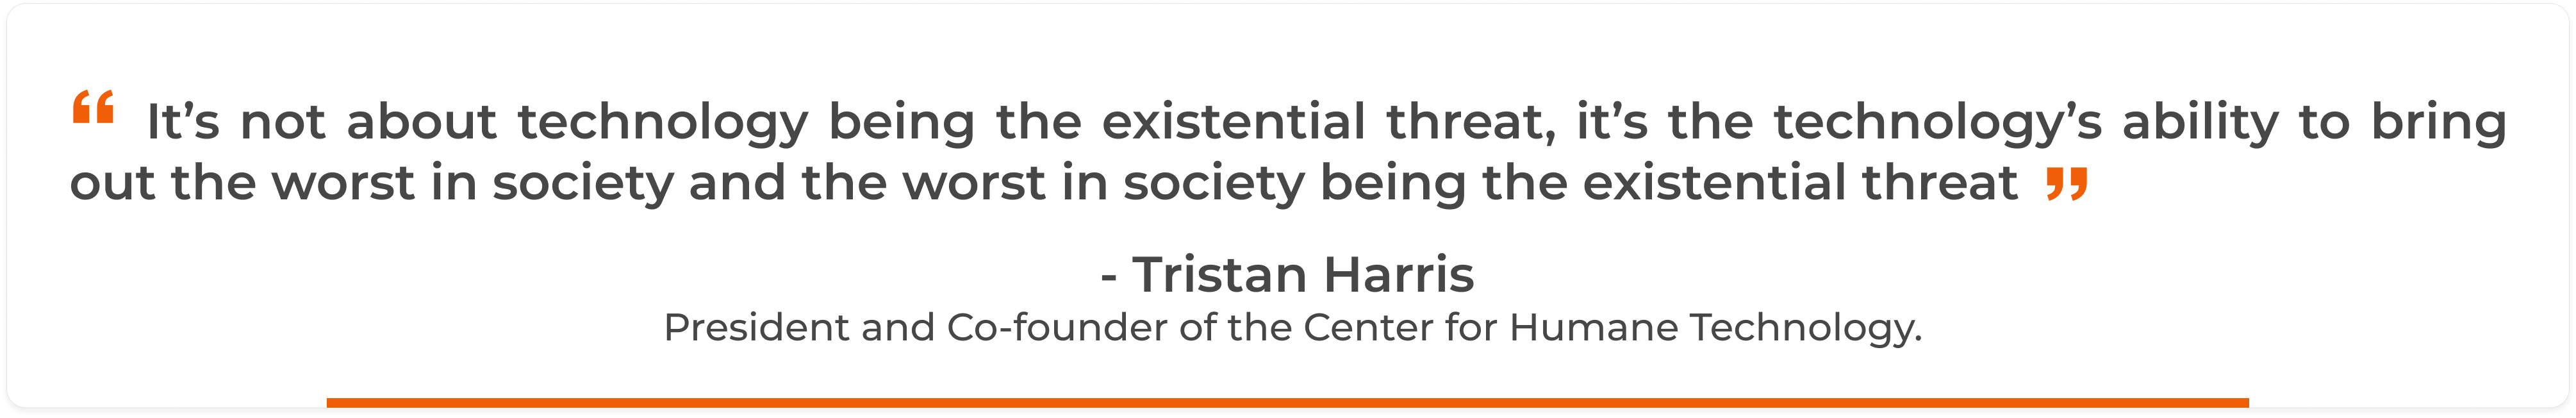 A quote by tristan harris on technology